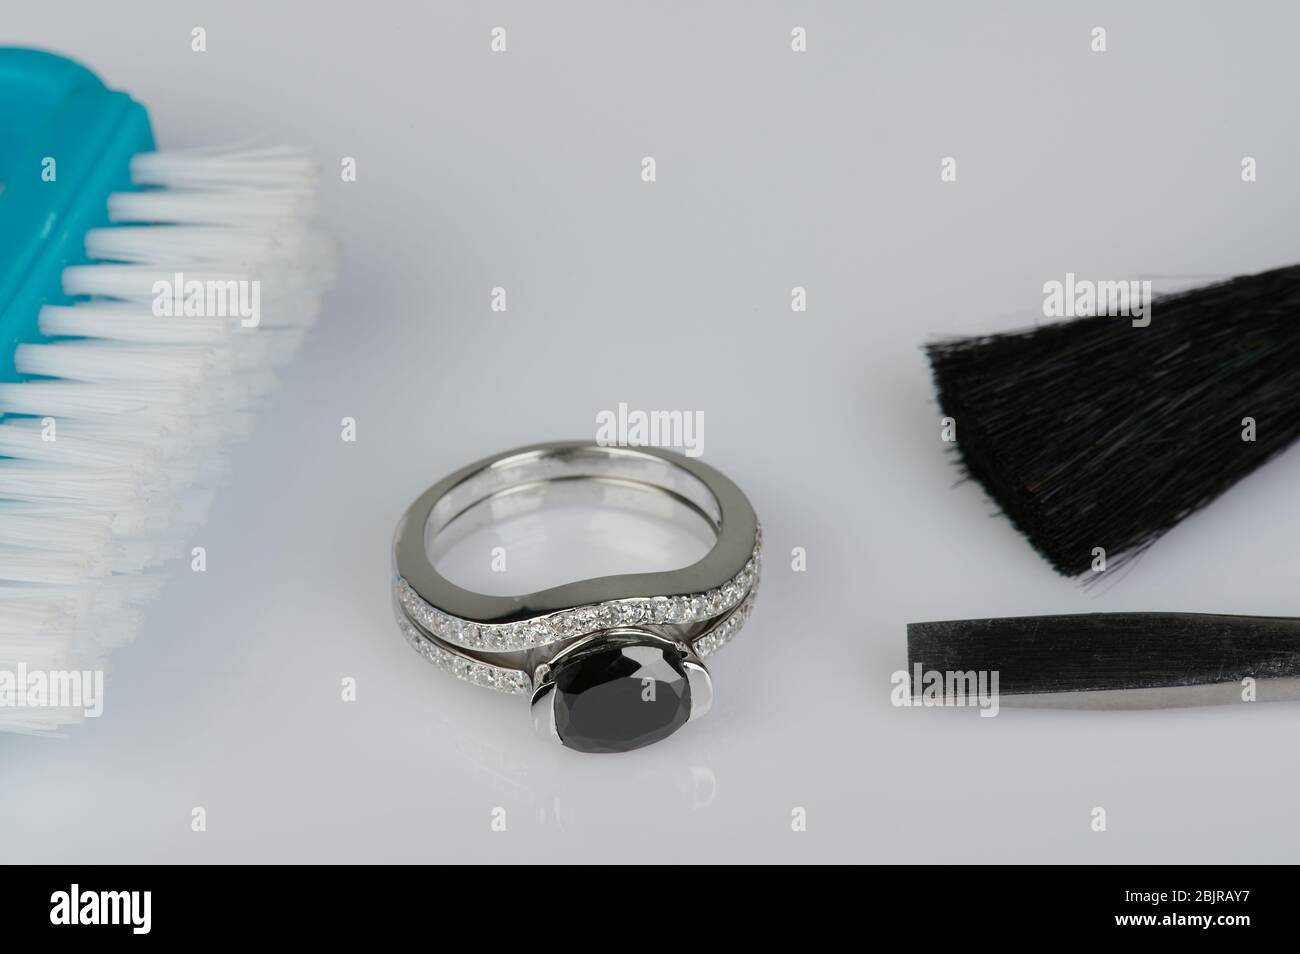 Polishing jewelry theme. Cleaning luxury ring with tool Stock Photo